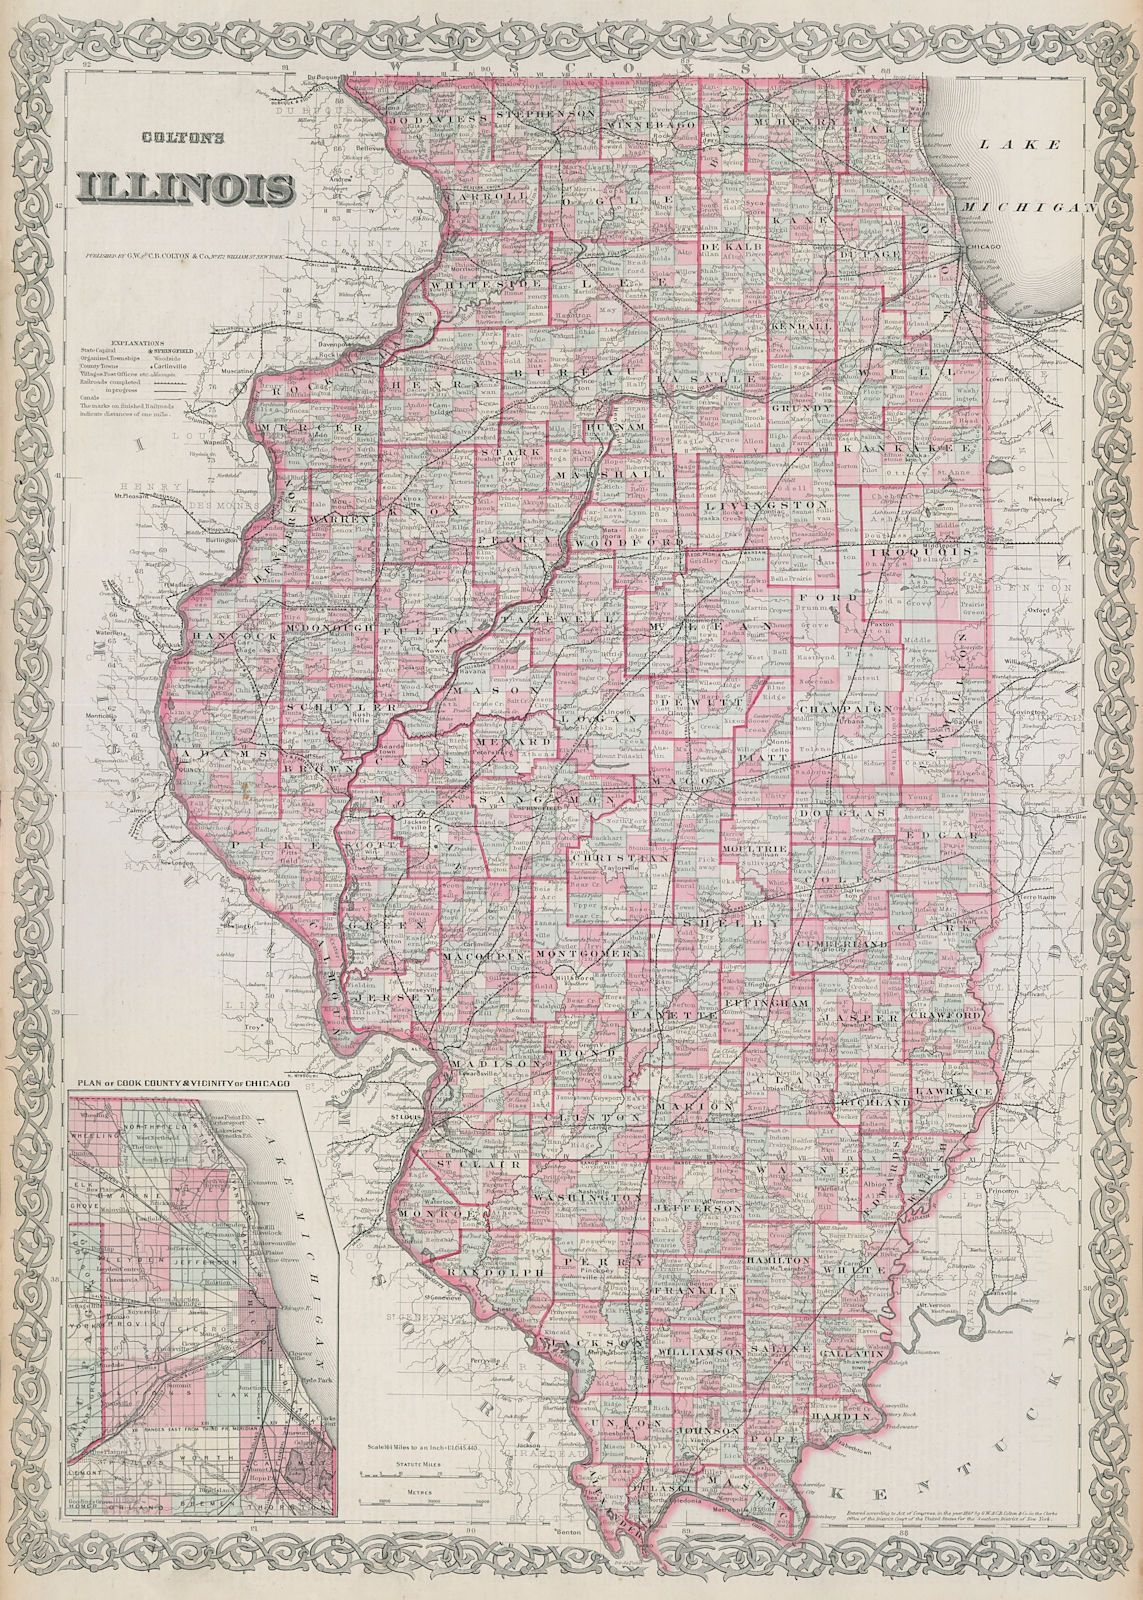 Associate Product Colton's Illinois. Decorative antique US state map 1869 old chart